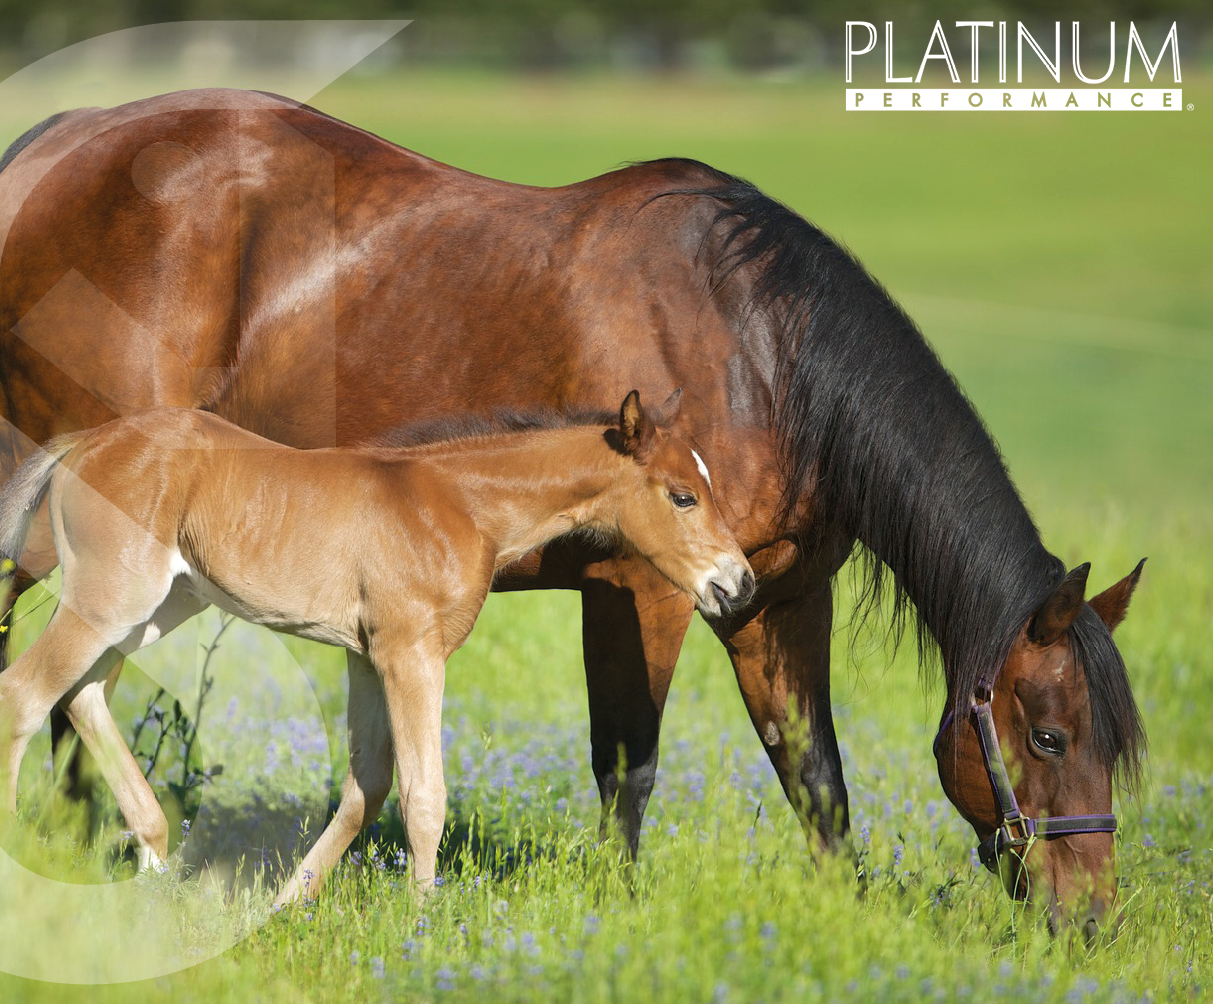 Weaning season nutrition for foals and mares